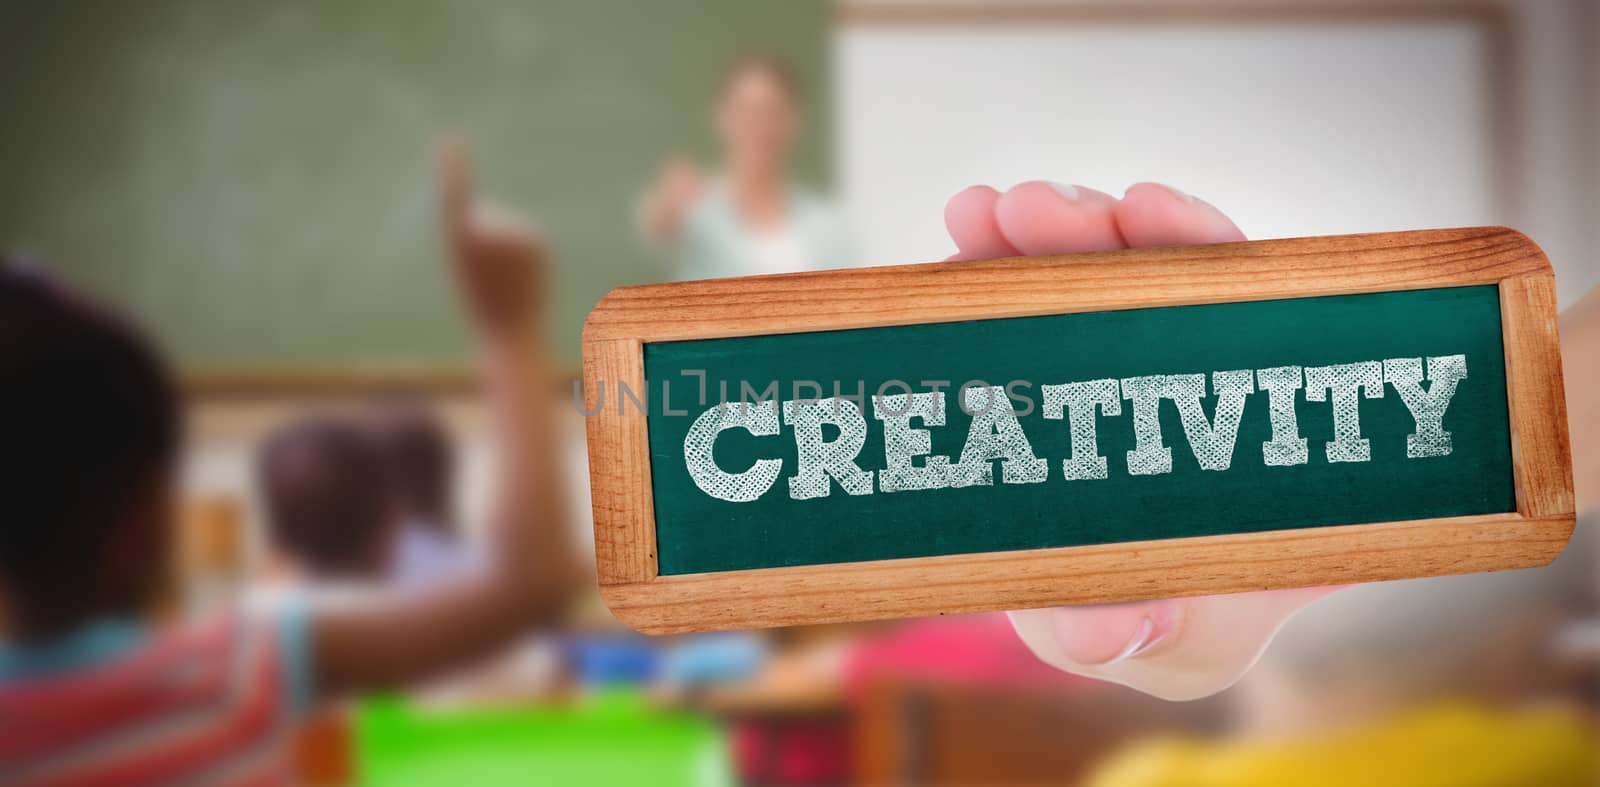 The word creativity and hand showing chalkboard against pupils raising their hands during class